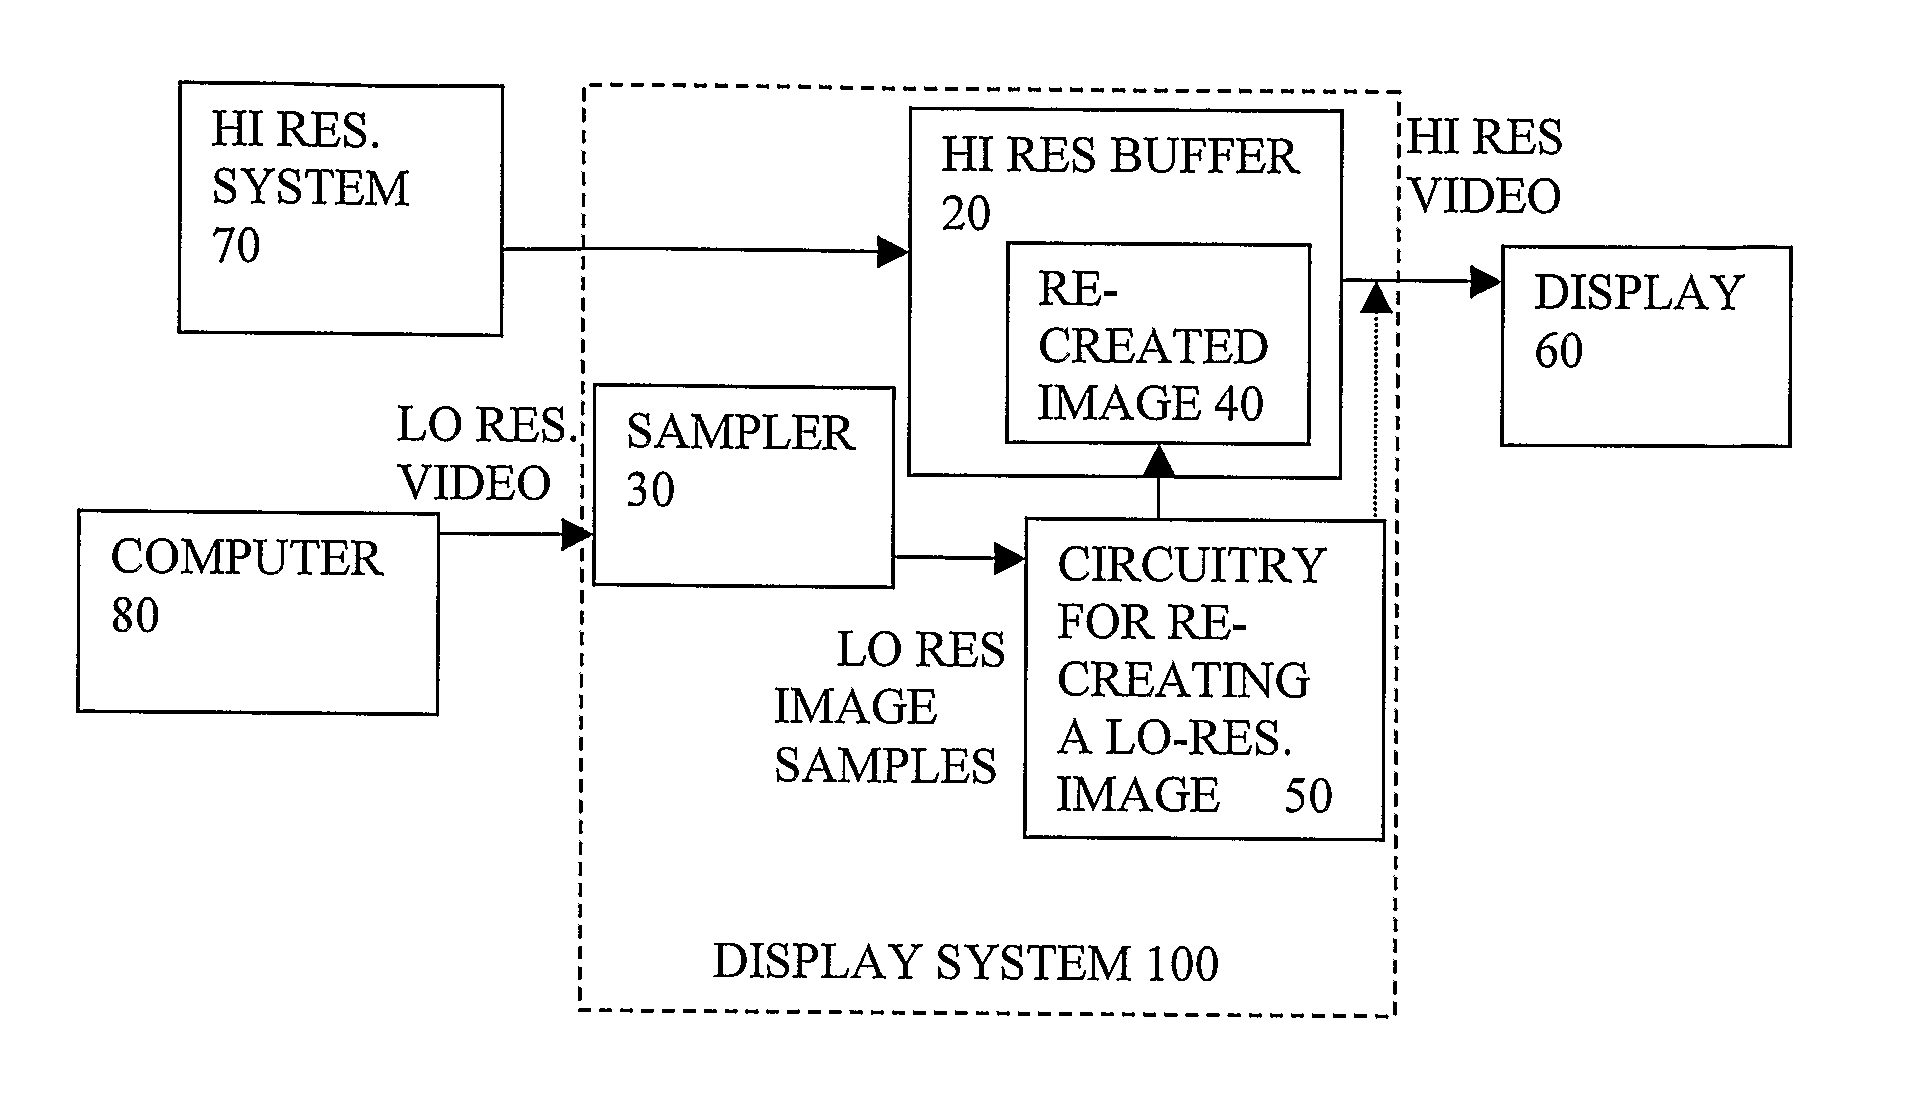 Asynchronous Video Capture for Insertion Into High Resolution Image